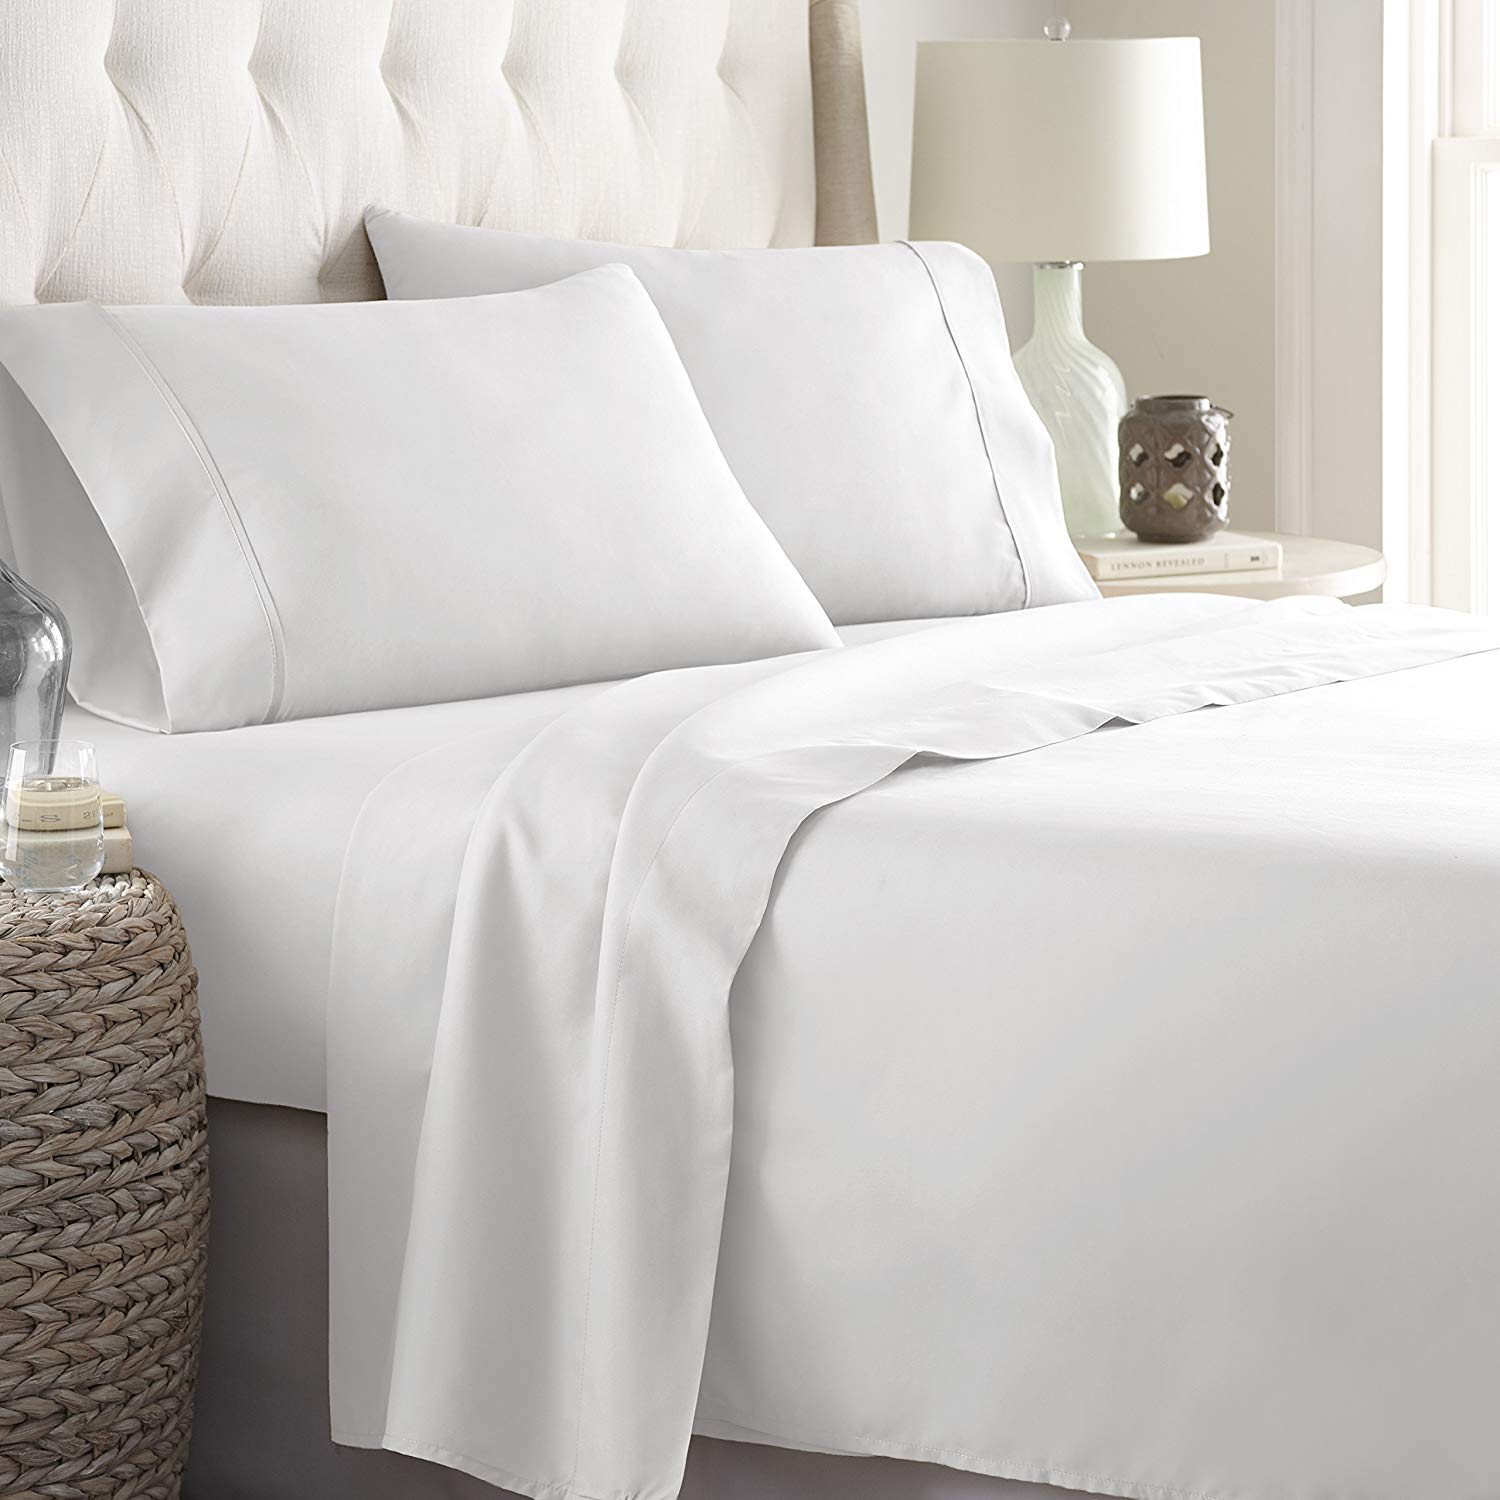 Wholesale Luxury Hotel Collection Cotton Polyester Bed Sheet Duvet Comforter Bedding Set In